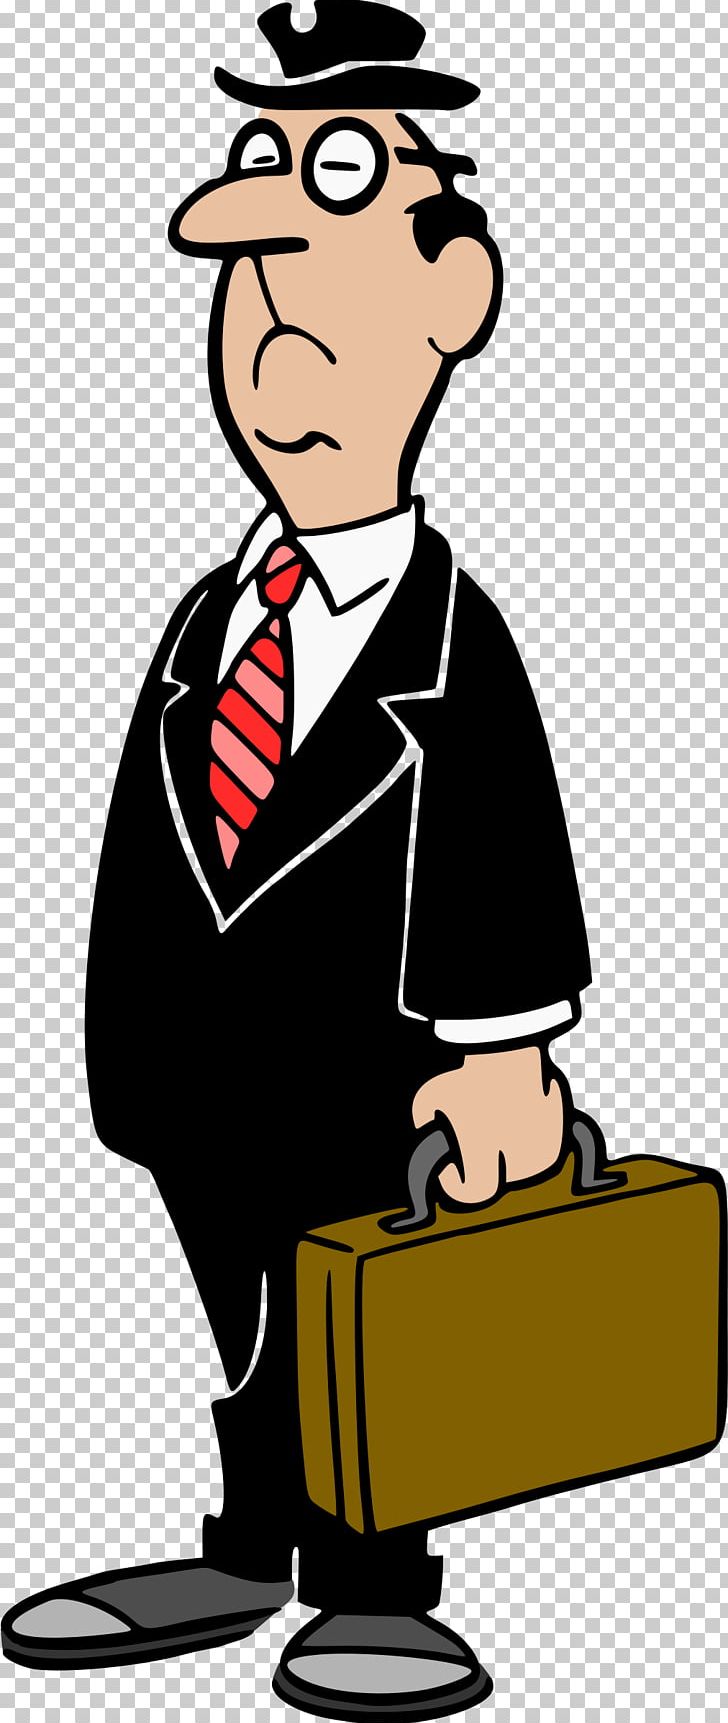 Businessperson Computer Icons PNG, Clipart, Artwork, Avatar, Business, Business Magnate, Businessperson Free PNG Download